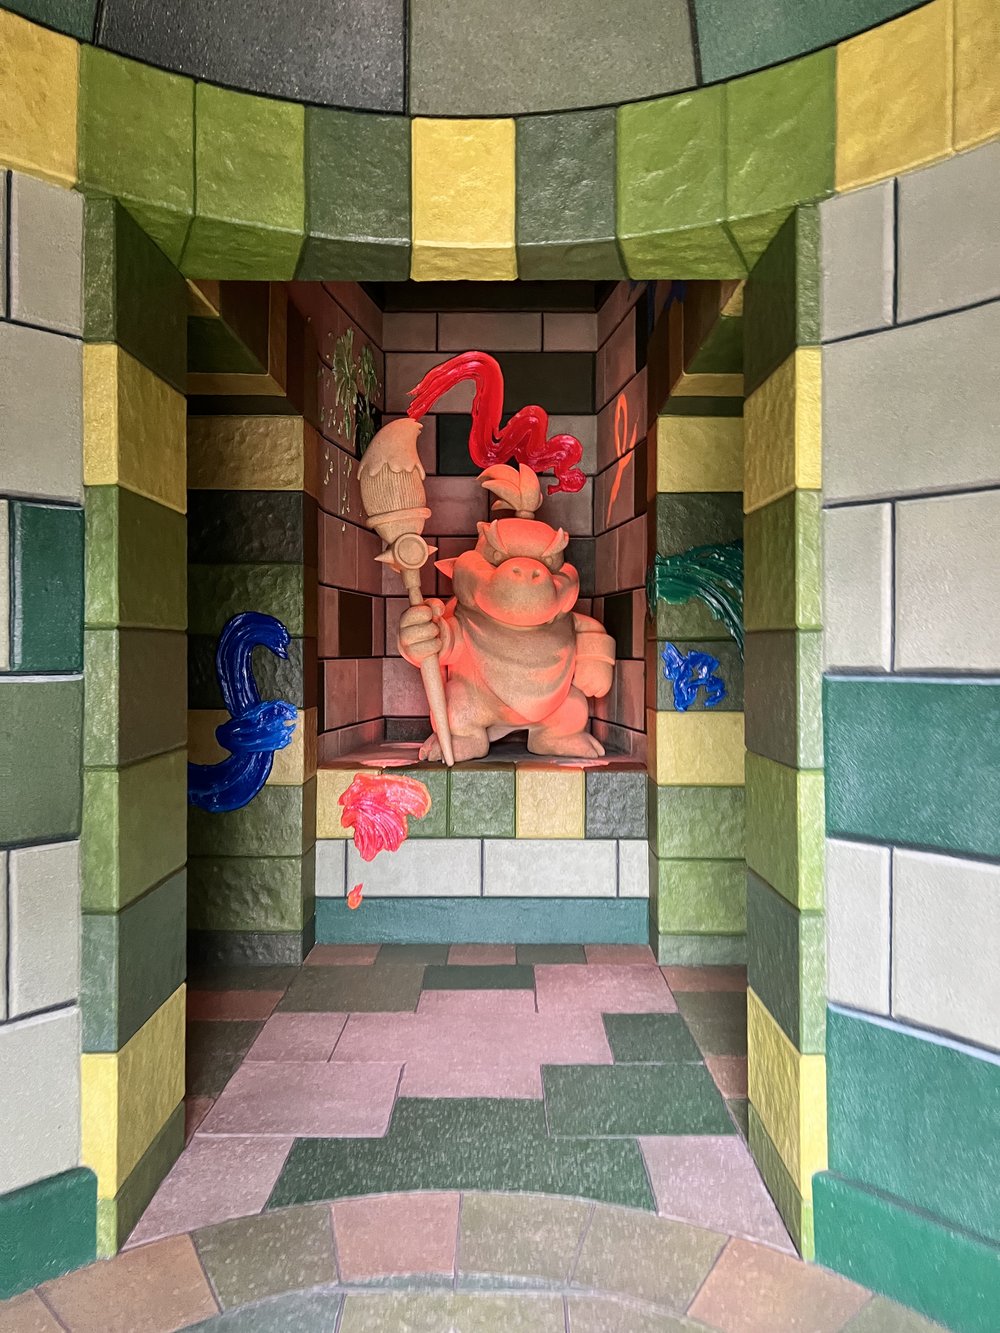  Bowser Jr. statue in a room with green, yellow, and gray bricks 